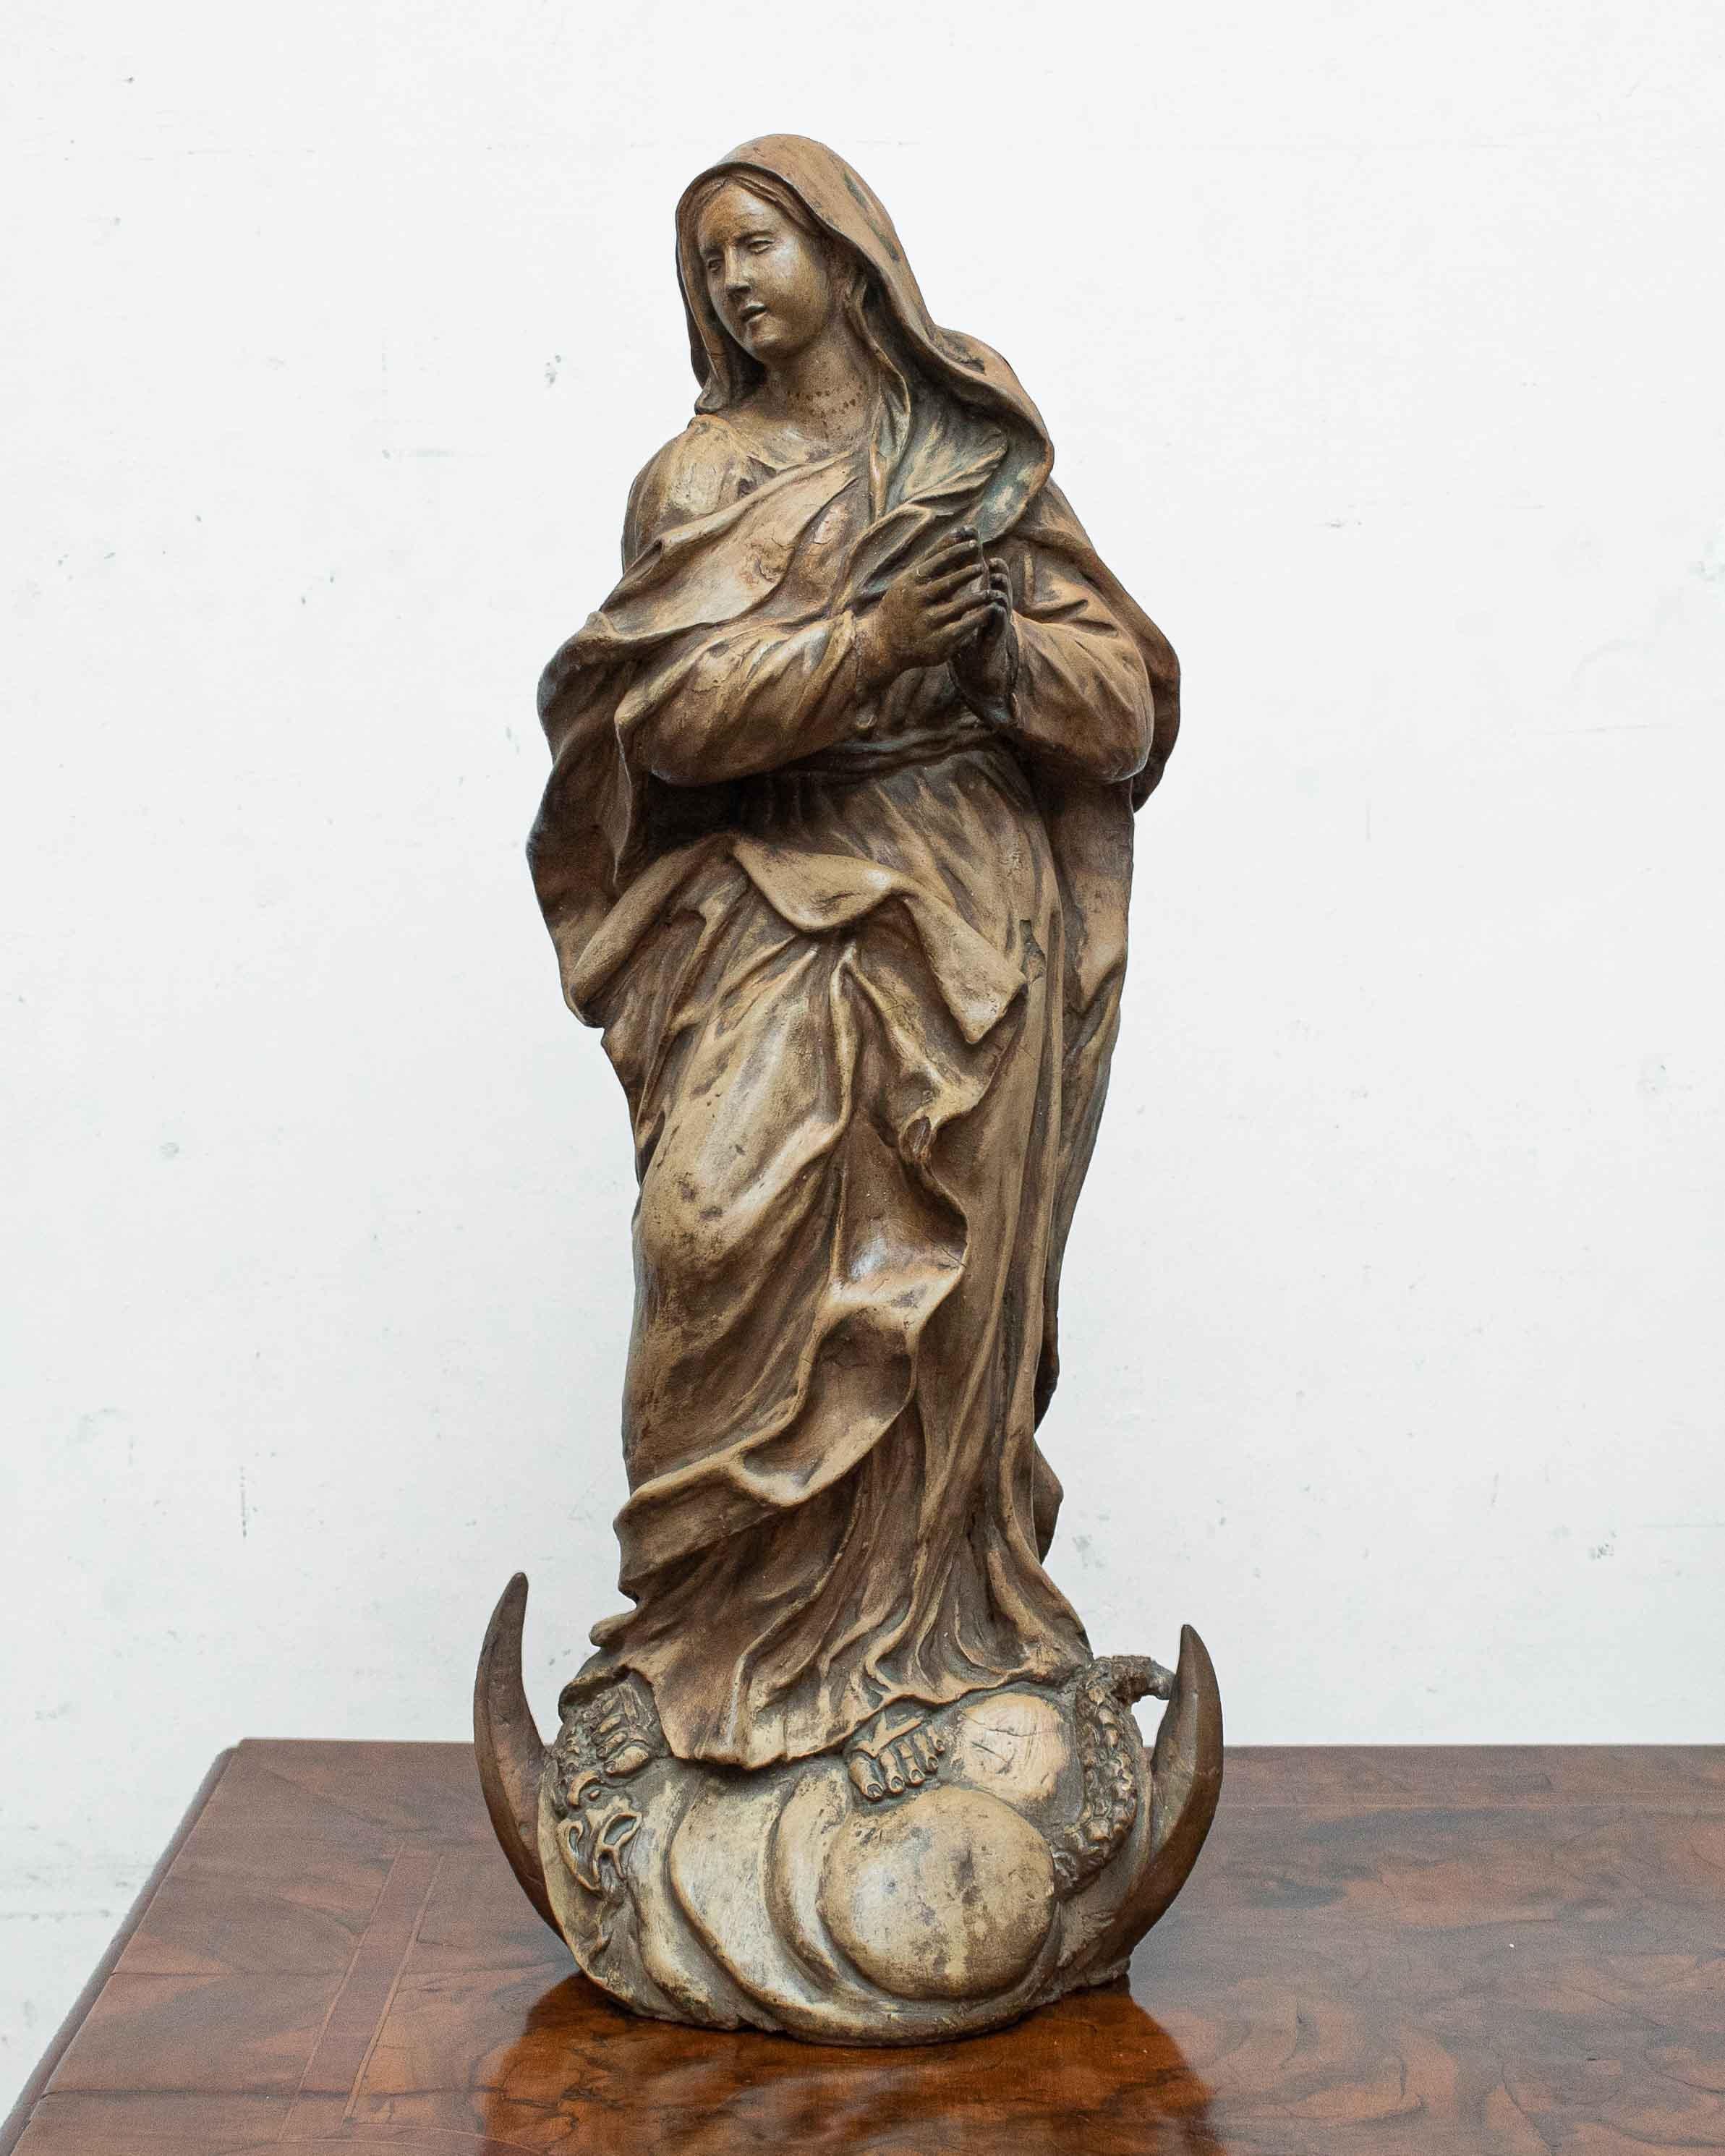 18th century

Immaculate Madonna

Terracotta, 53 x 22 x 20 cm

The work examined depicts the Virgin Mary treated according to the iconography of the Immaculate Virgin

The theme of the Immaculate Conception began to appear in artistic works